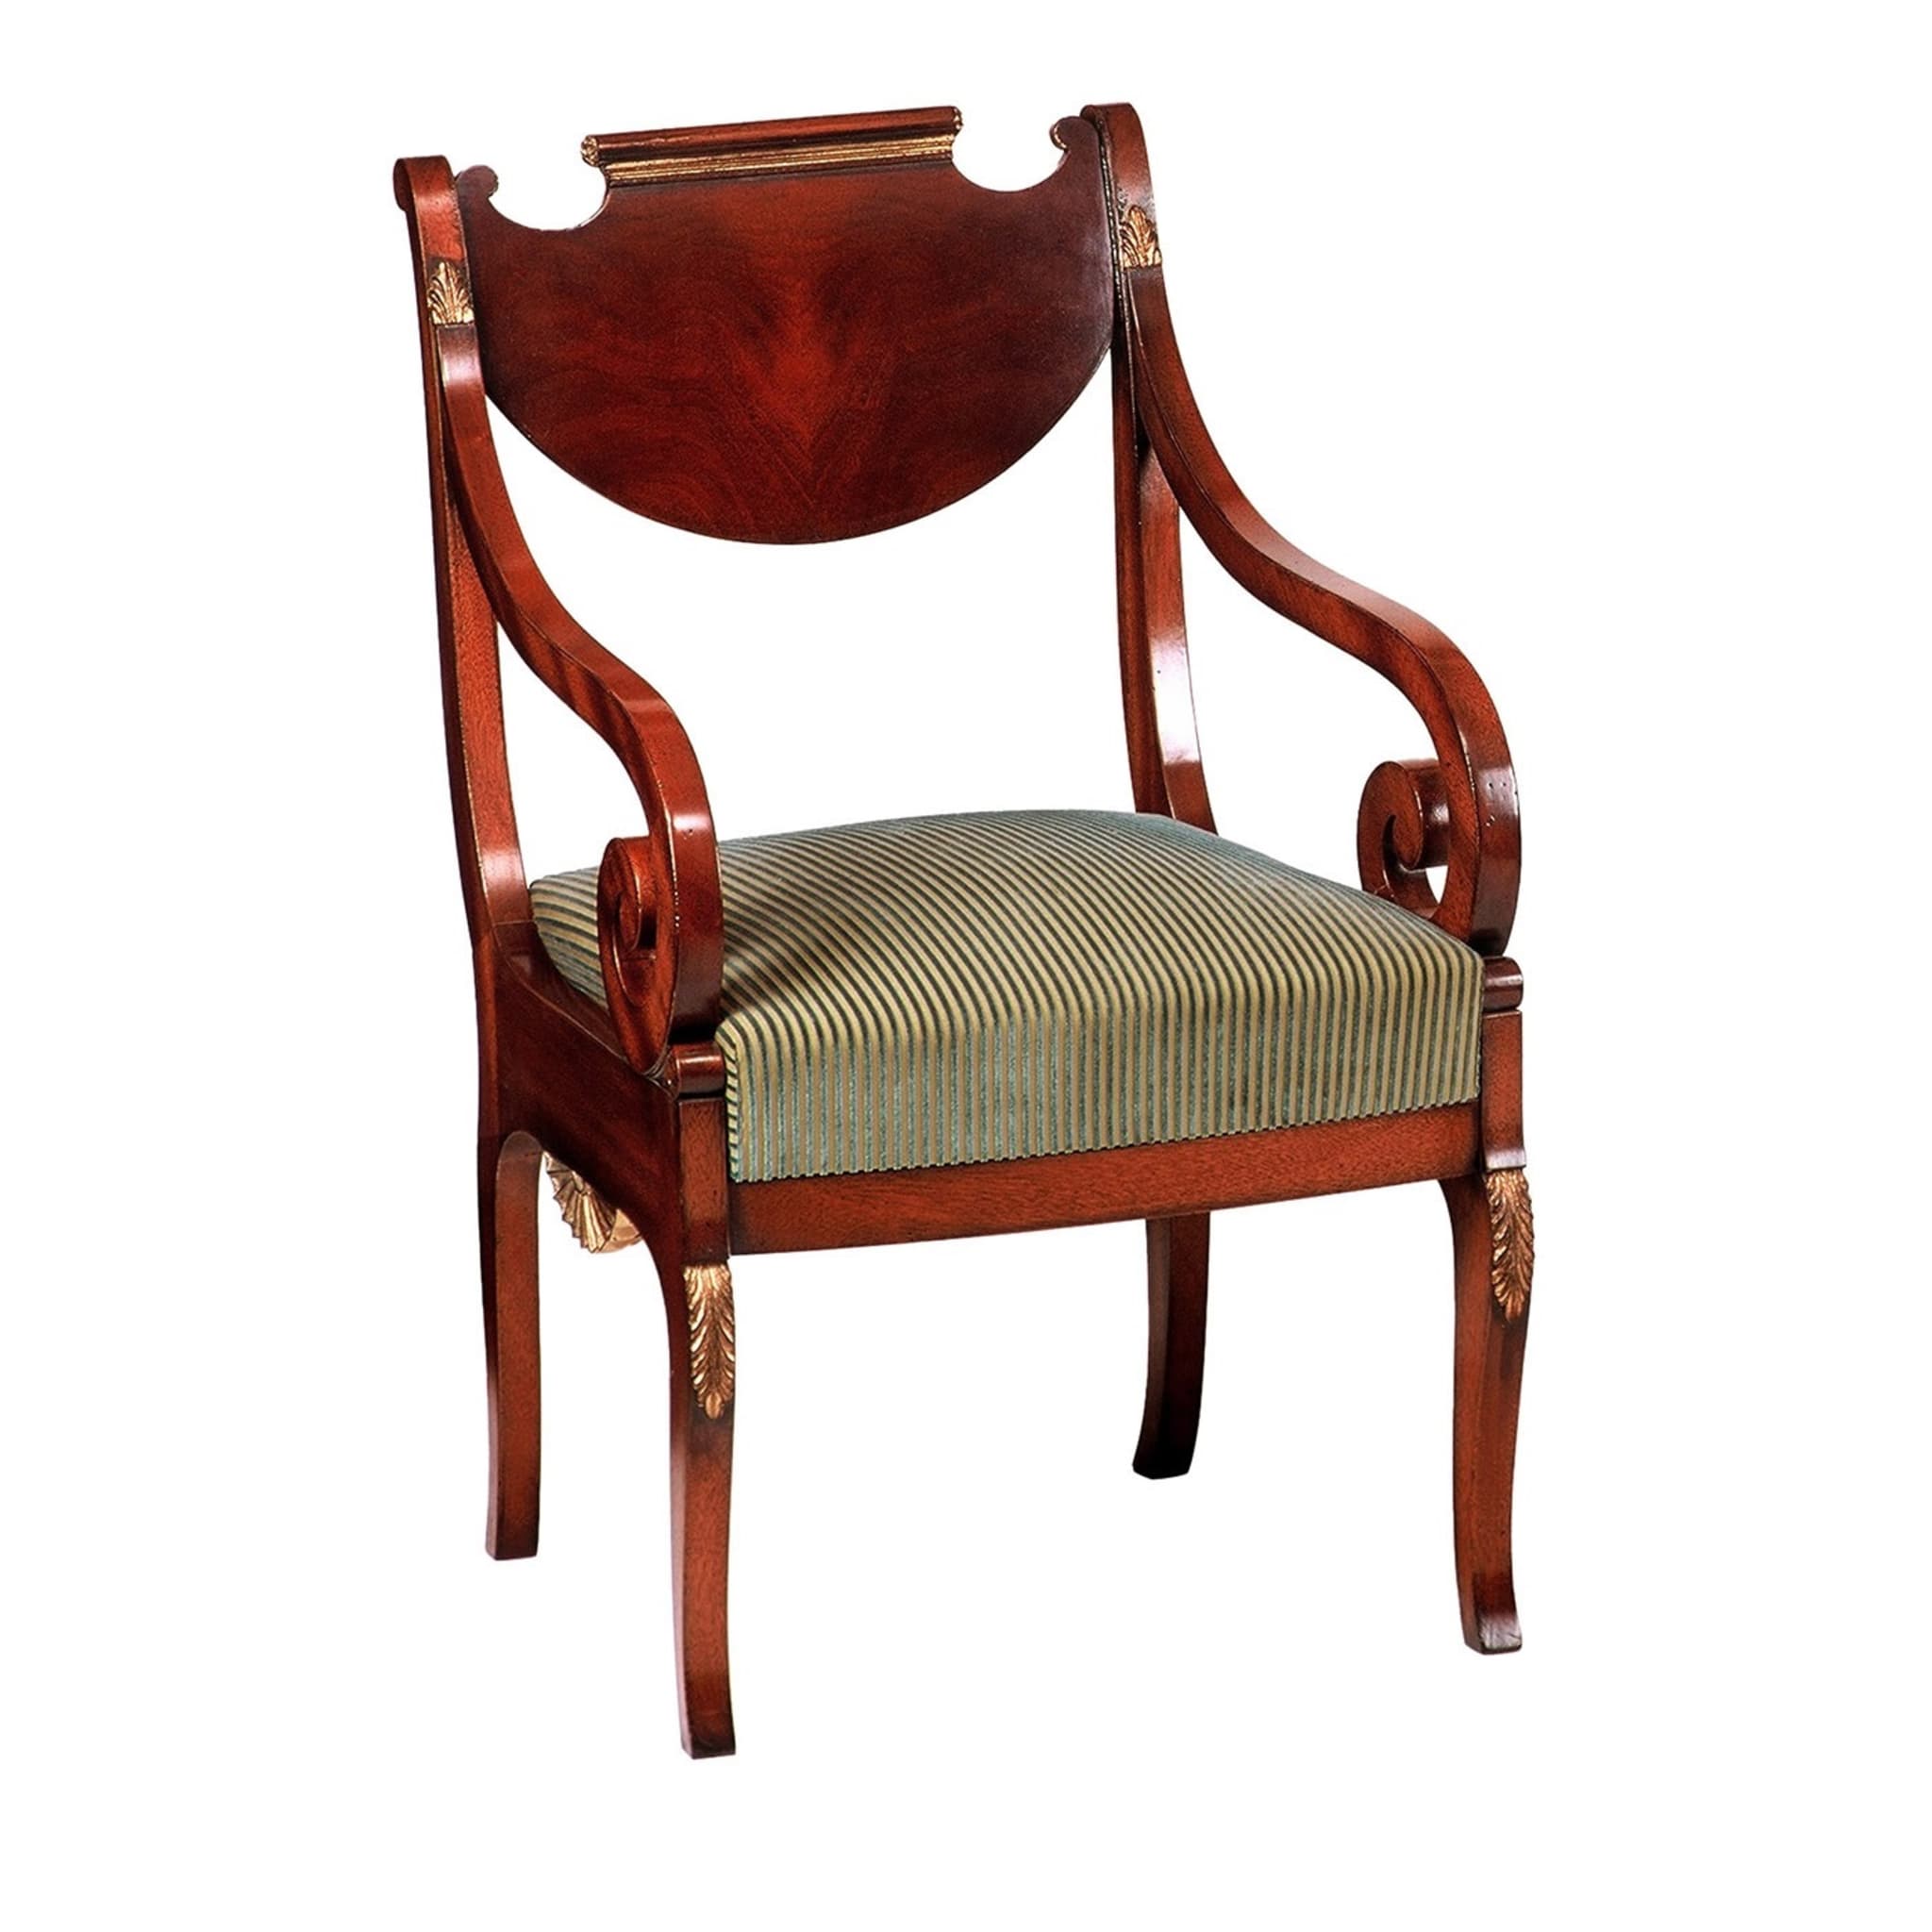 Russian Empire-Style Mahogany Chair With Arms - Main view